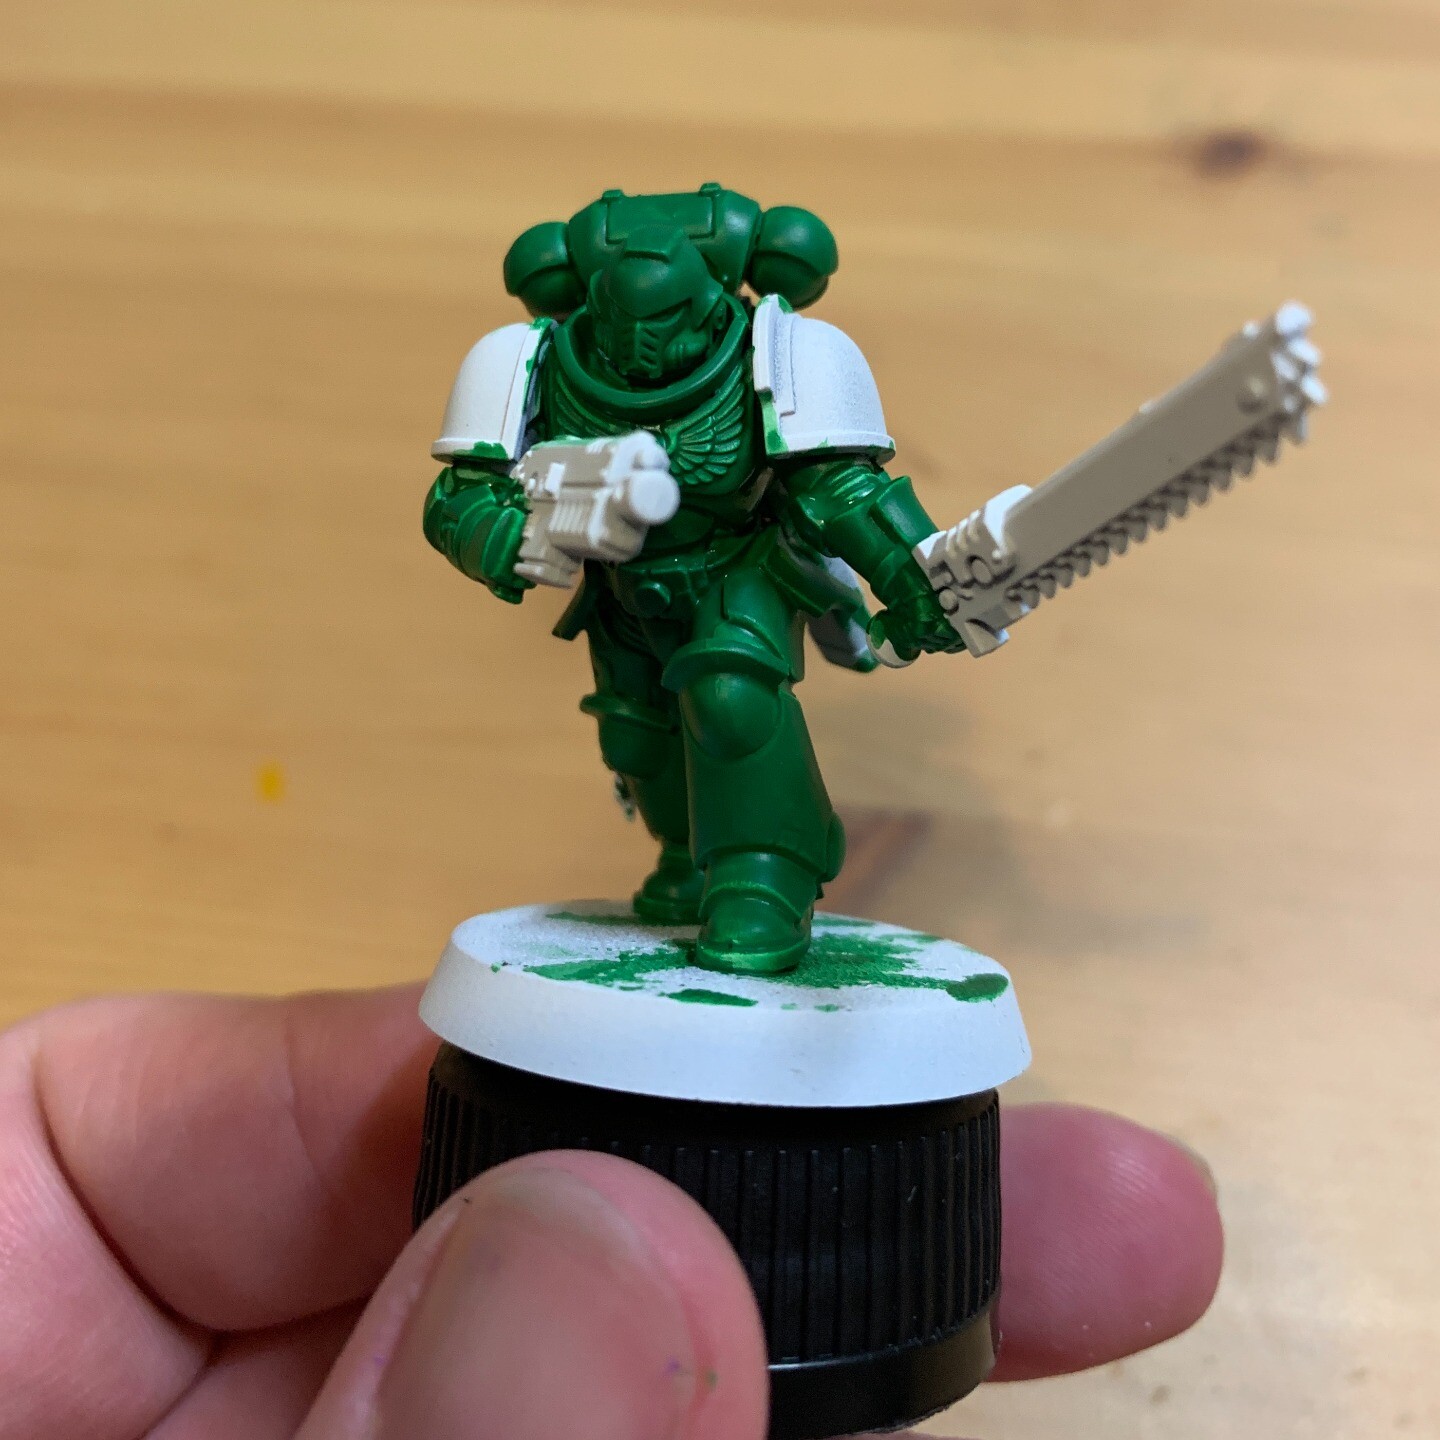 I'm holding a half-painted Warhammer 40k Assult Intercessor Space Marine. The main armour and backpack have been painted in a middle-to-dark green colour. The shoulder pads and weapons are unpainted and white. The base is unpainted and is on a black bottle cap.  My hand is in the bottom of the frame with some green paint on the nail. The background is white parchment.